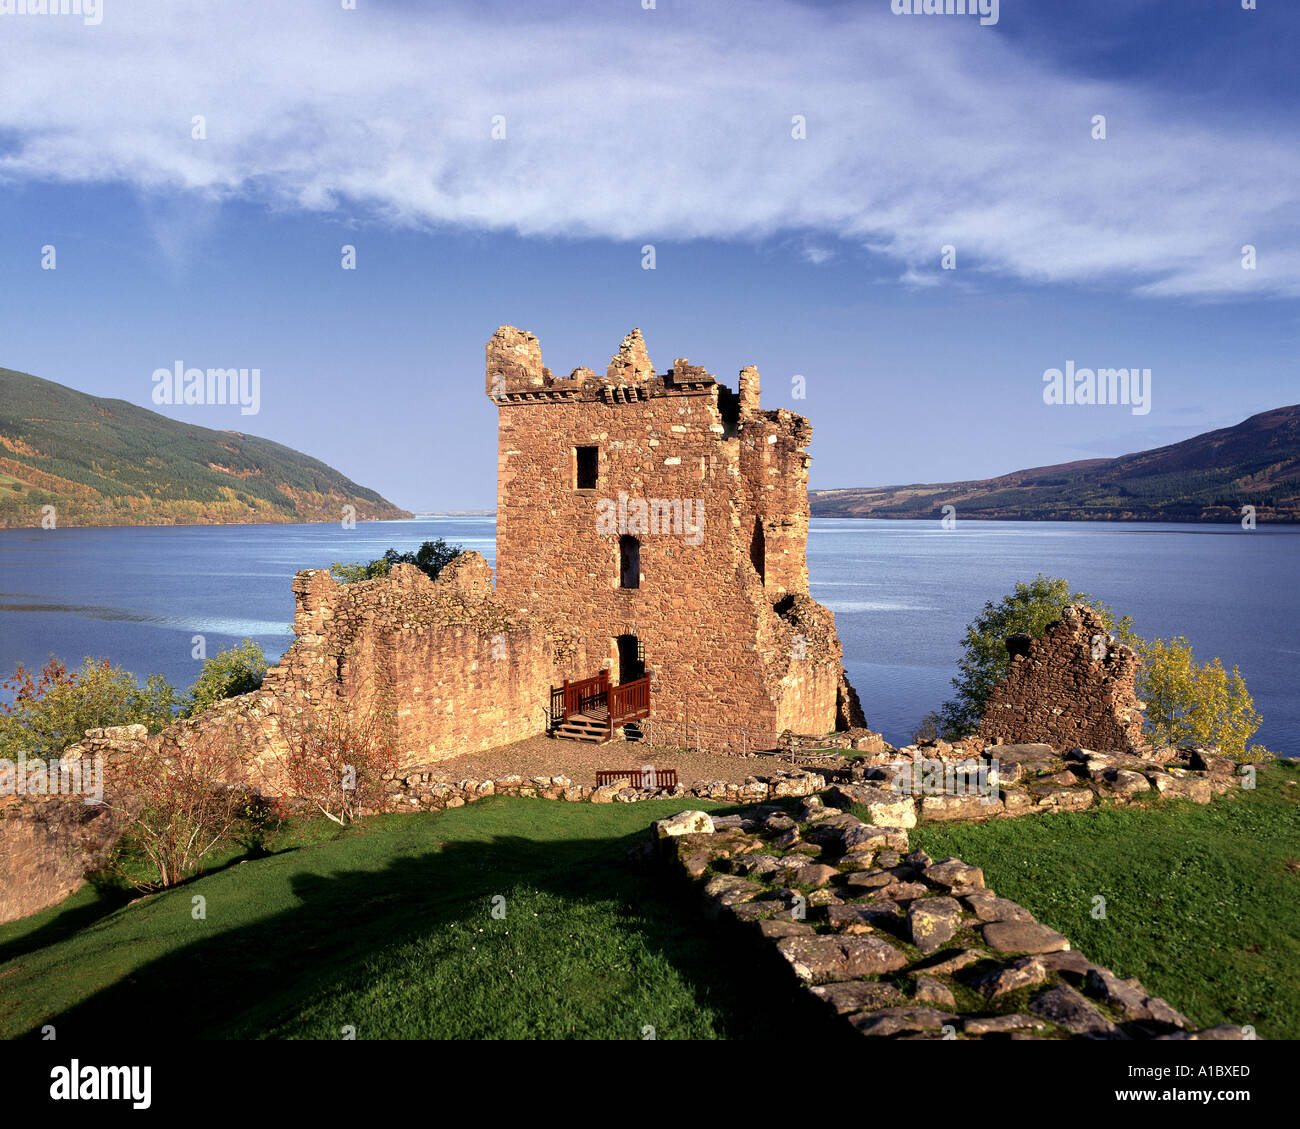 GB - SCOTLAND: Urquhart Castle and Loch Ness Stock Photo